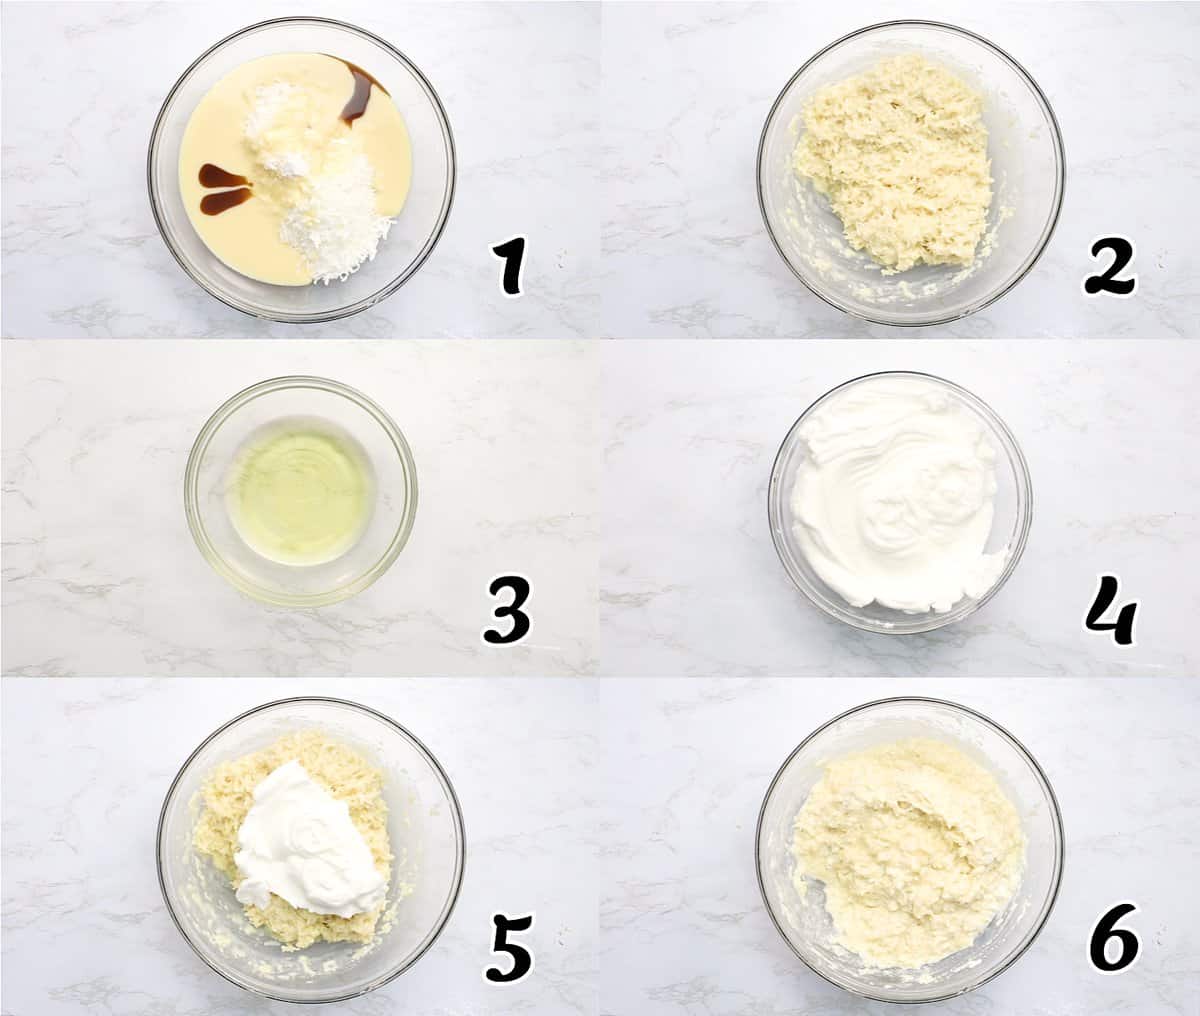 Mix the sweetener, beat the egg whites, and mix the whole.